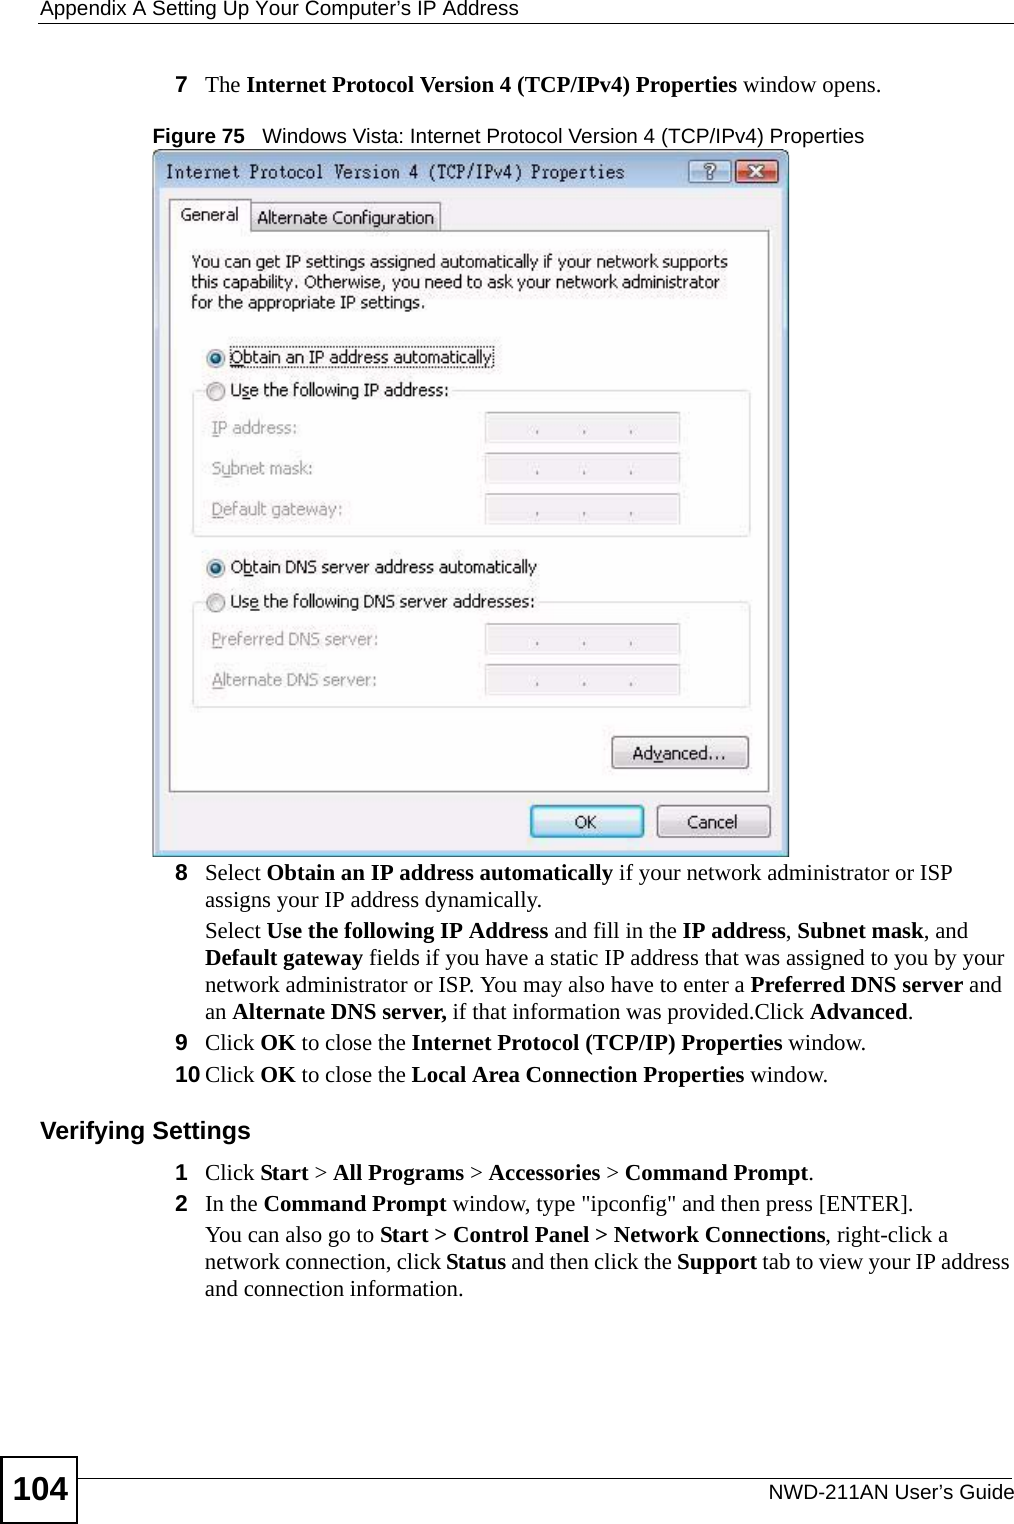 Appendix A Setting Up Your Computer’s IP AddressNWD-211AN User’s Guide1047The Internet Protocol Version 4 (TCP/IPv4) Properties window opens.Figure 75   Windows Vista: Internet Protocol Version 4 (TCP/IPv4) Properties8Select Obtain an IP address automatically if your network administrator or ISP assigns your IP address dynamically.Select Use the following IP Address and fill in the IP address, Subnet mask, and Default gateway fields if you have a static IP address that was assigned to you by your network administrator or ISP. You may also have to enter a Preferred DNS server and an Alternate DNS server, if that information was provided.Click Advanced.9Click OK to close the Internet Protocol (TCP/IP) Properties window.10 Click OK to close the Local Area Connection Properties window.Verifying Settings1Click Start &gt; All Programs &gt; Accessories &gt; Command Prompt.2In the Command Prompt window, type &quot;ipconfig&quot; and then press [ENTER]. You can also go to Start &gt; Control Panel &gt; Network Connections, right-click a network connection, click Status and then click the Support tab to view your IP address and connection information.